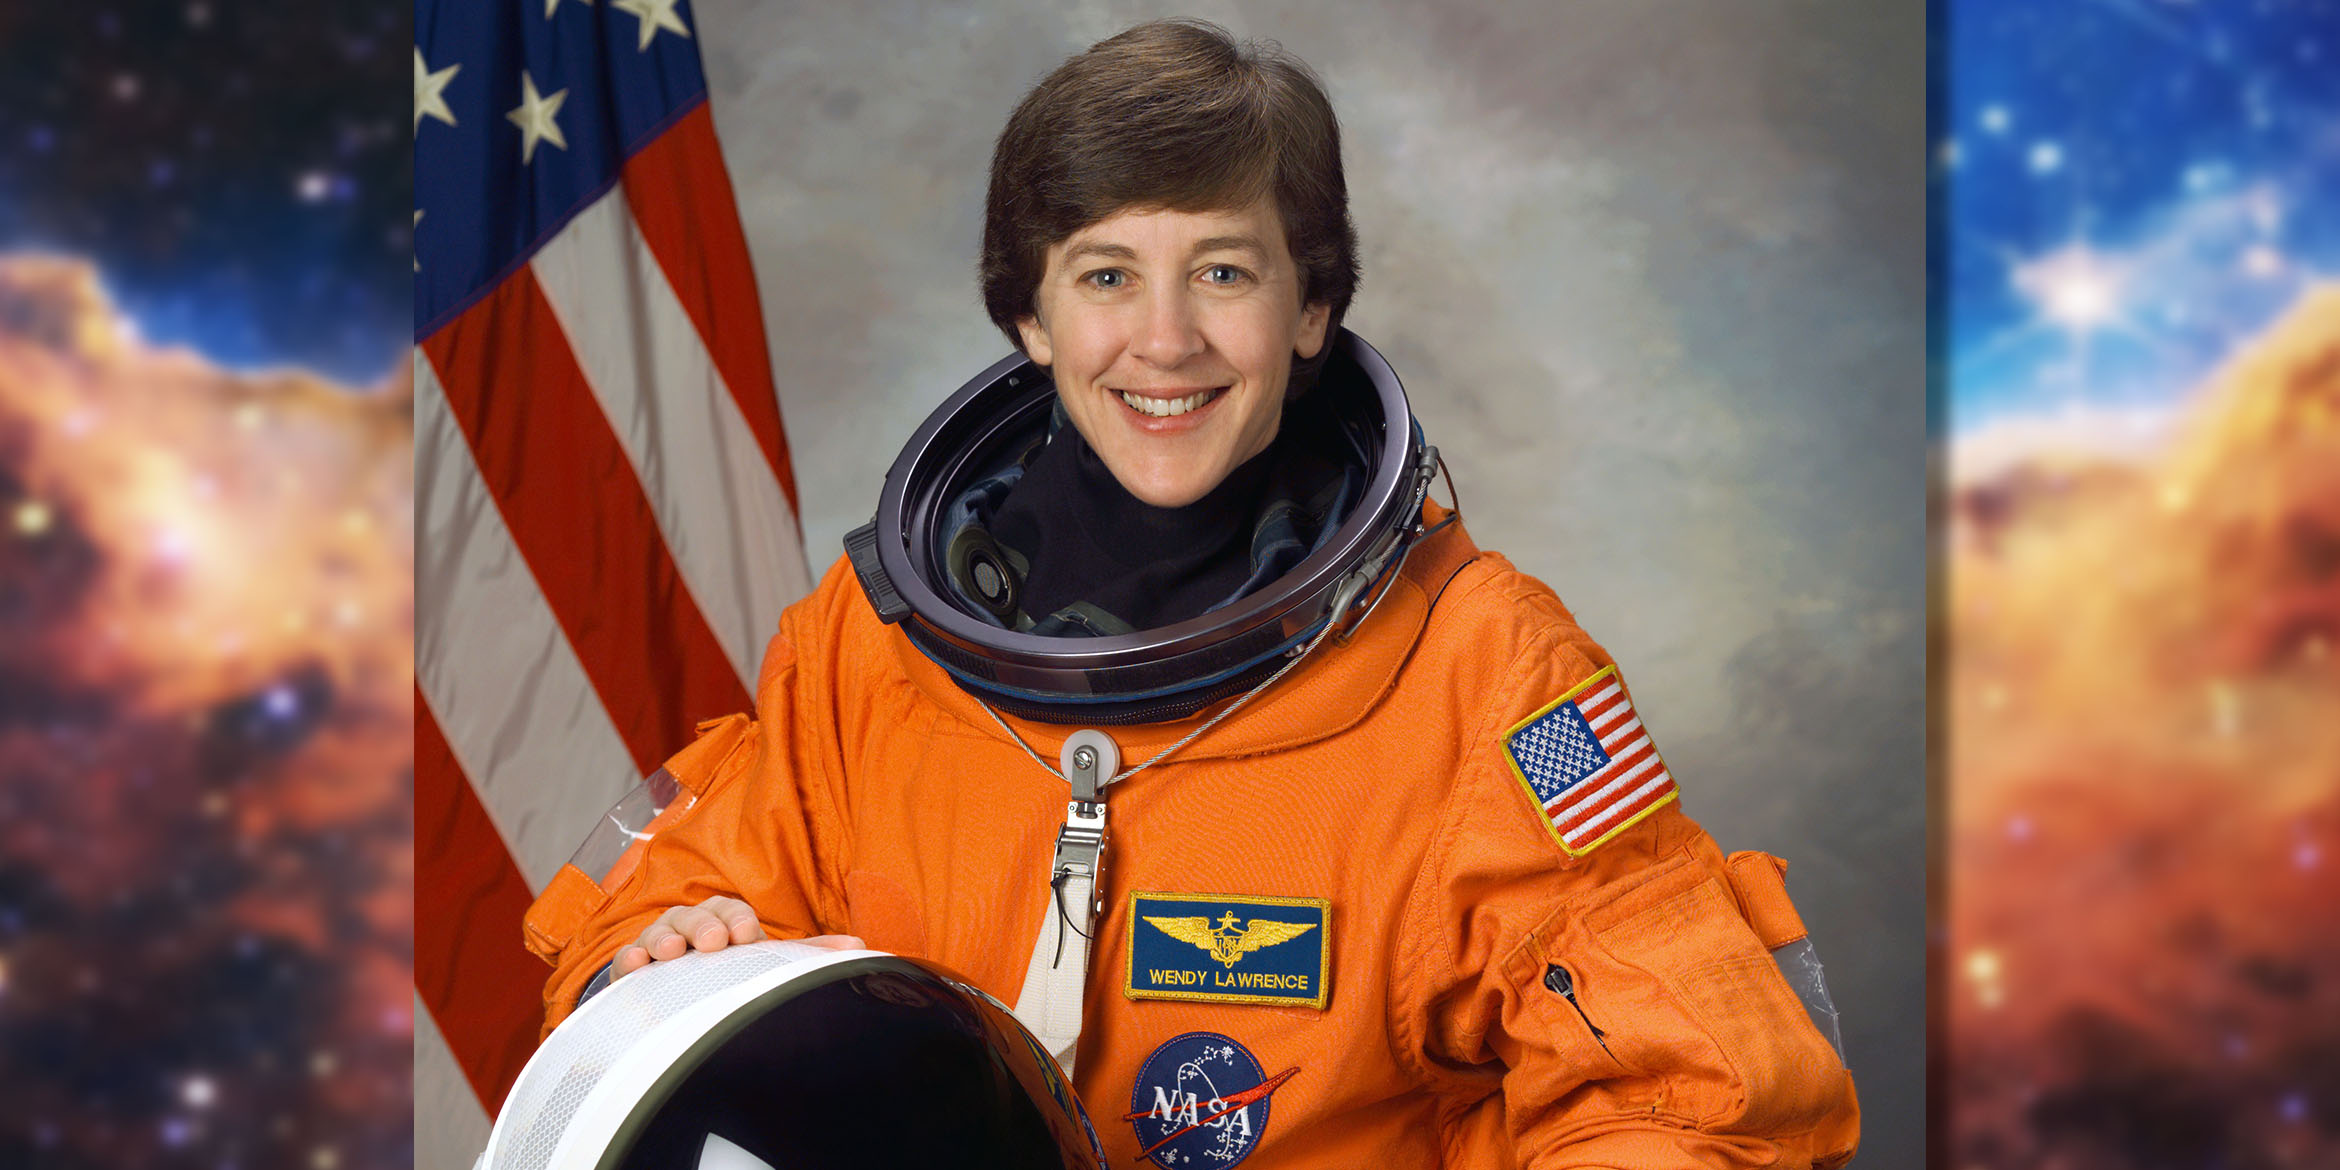 Featured image: A portrait of NASA astronaut Wendy Lawrence in her orange flight suit. - Read full post: Ad Astra with Astronaut Wendy Lawrence